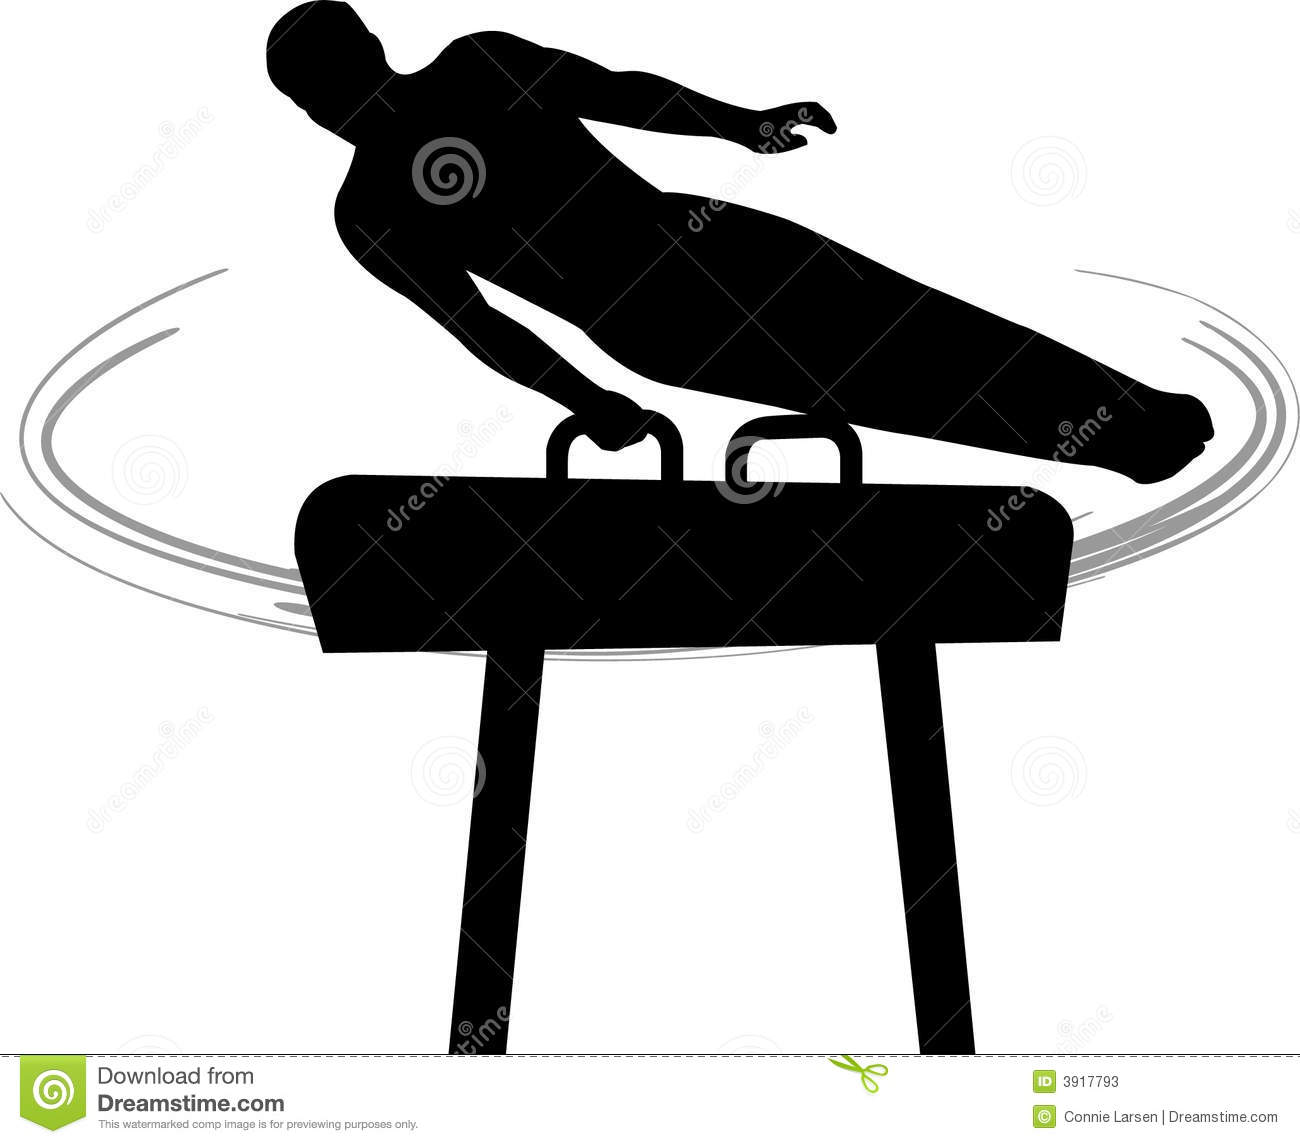 Silhouette Illustration Of A Male Gymnast Performing A Routine On The